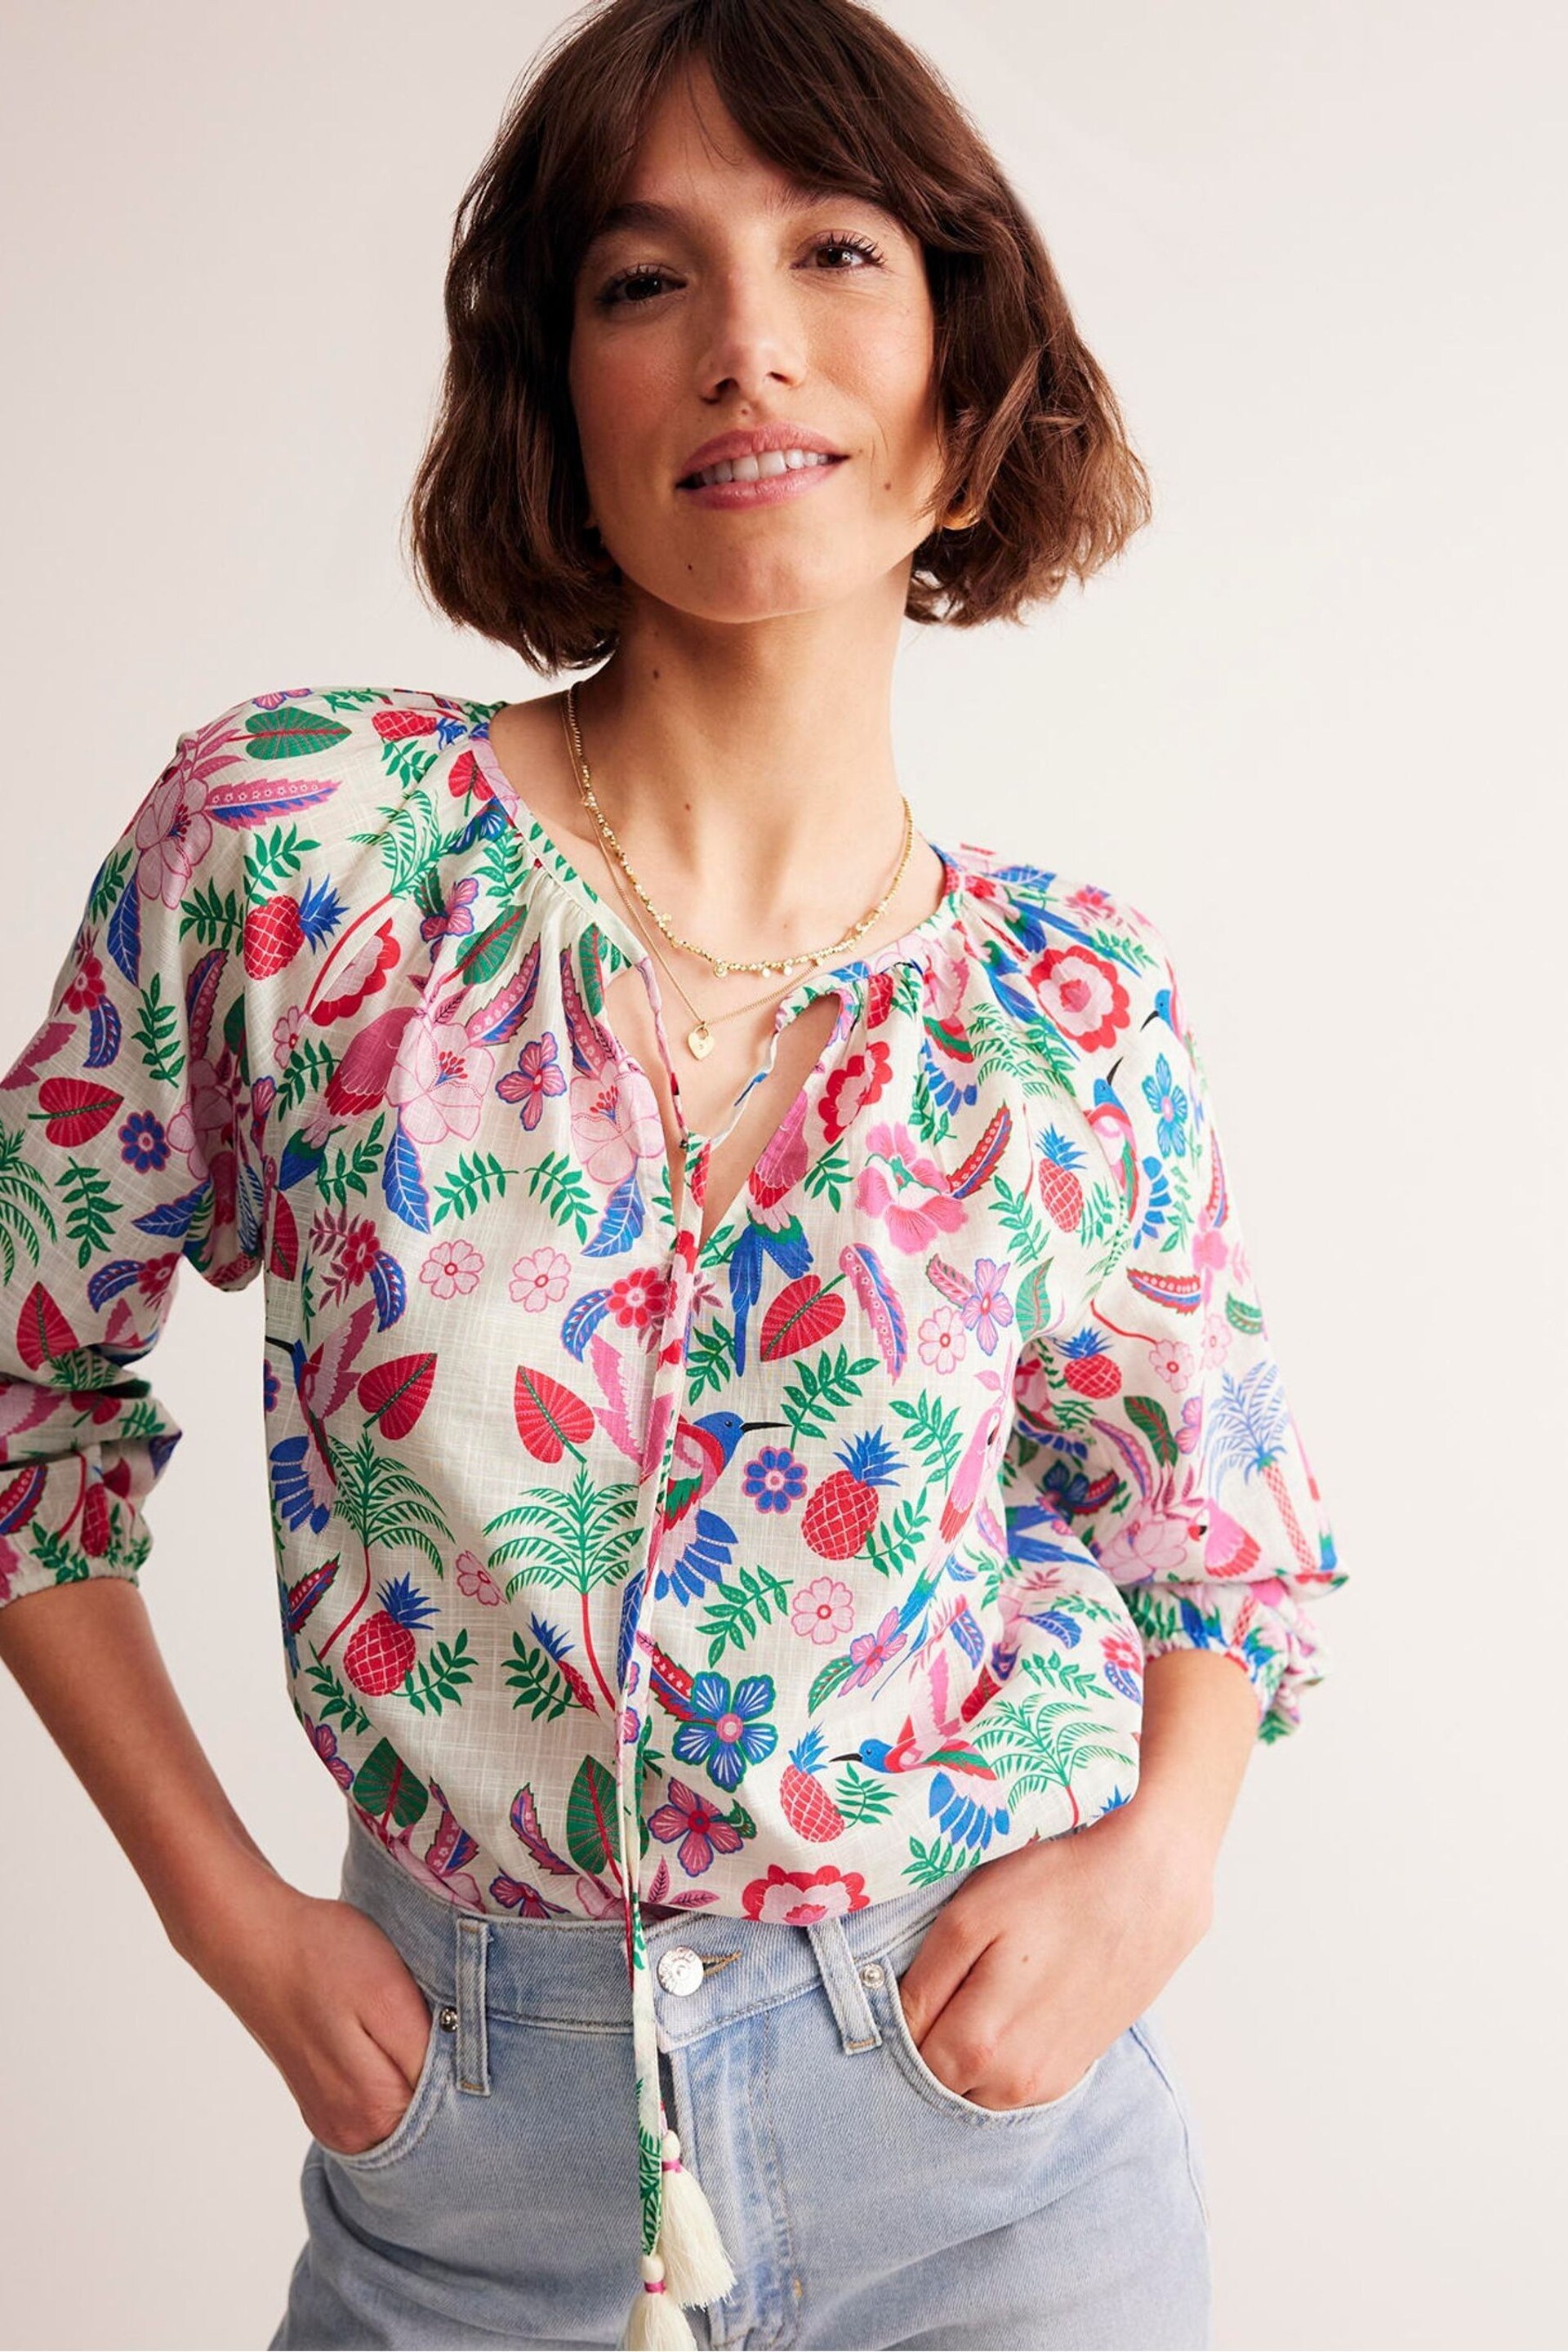 Boden Pink Serena Tropical Cotton Blouse - Image 1 of 6